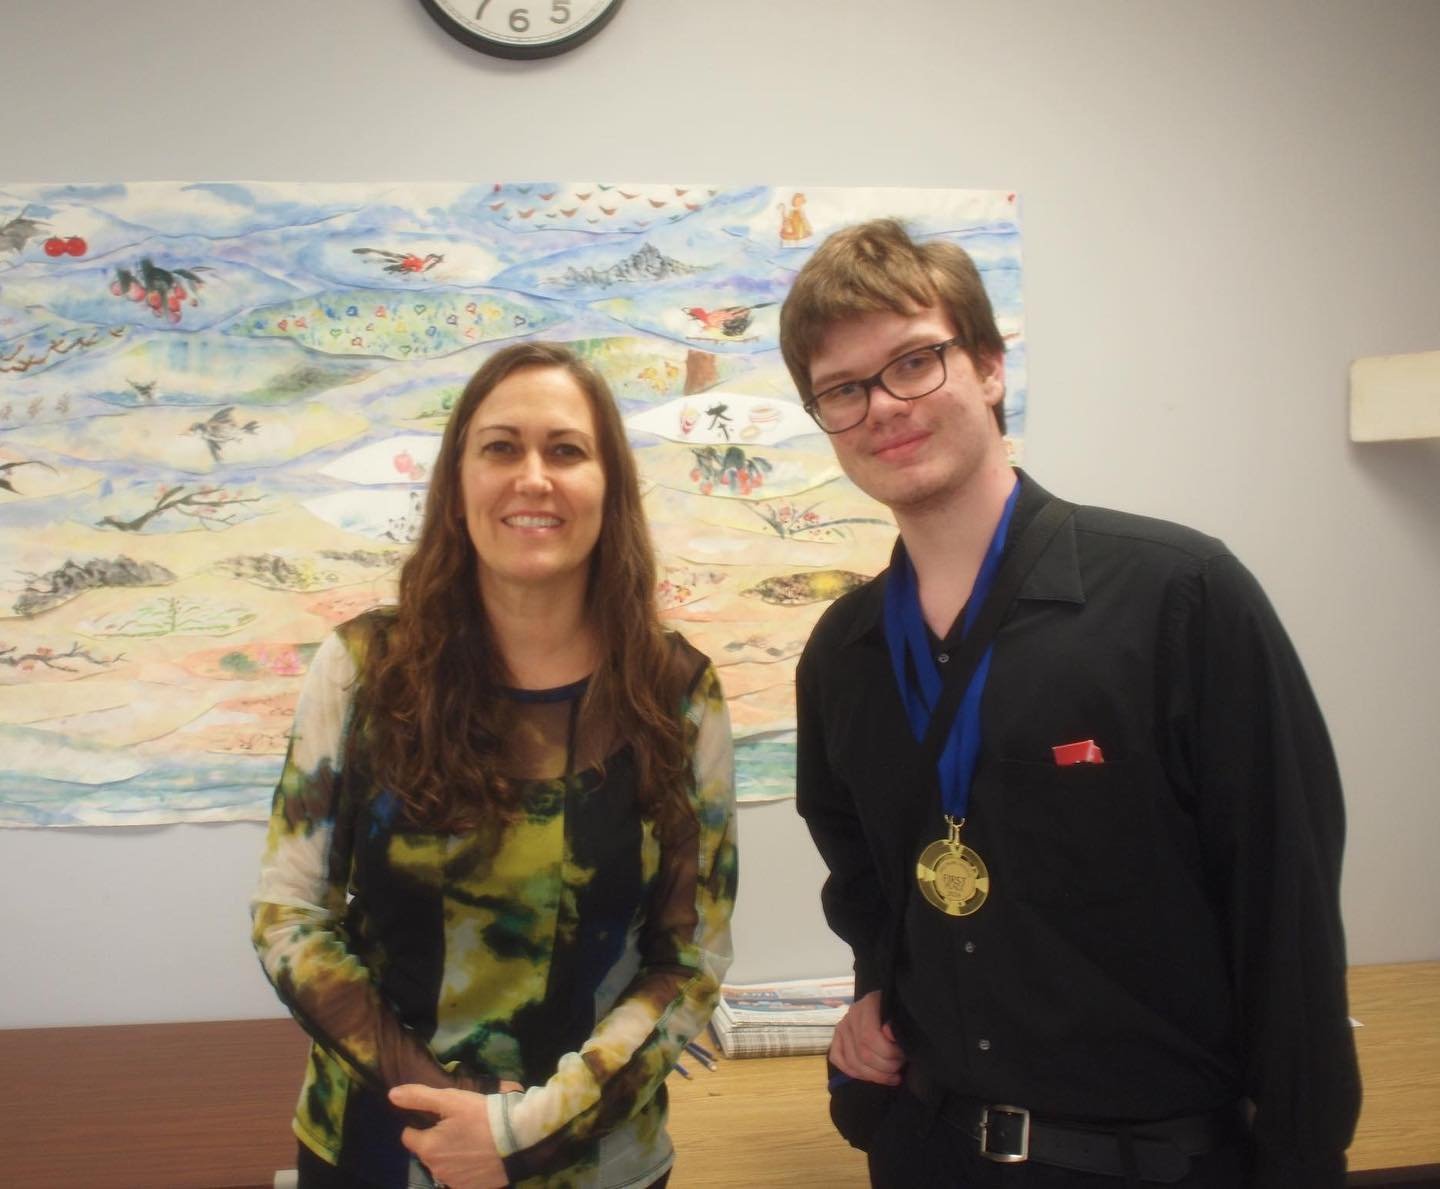 Congrats to Ben for winning two golds at the Peel Music Festival in level 7 voice! Way to go Ben 🎶 (featured here with his collaborative pianist Mary)